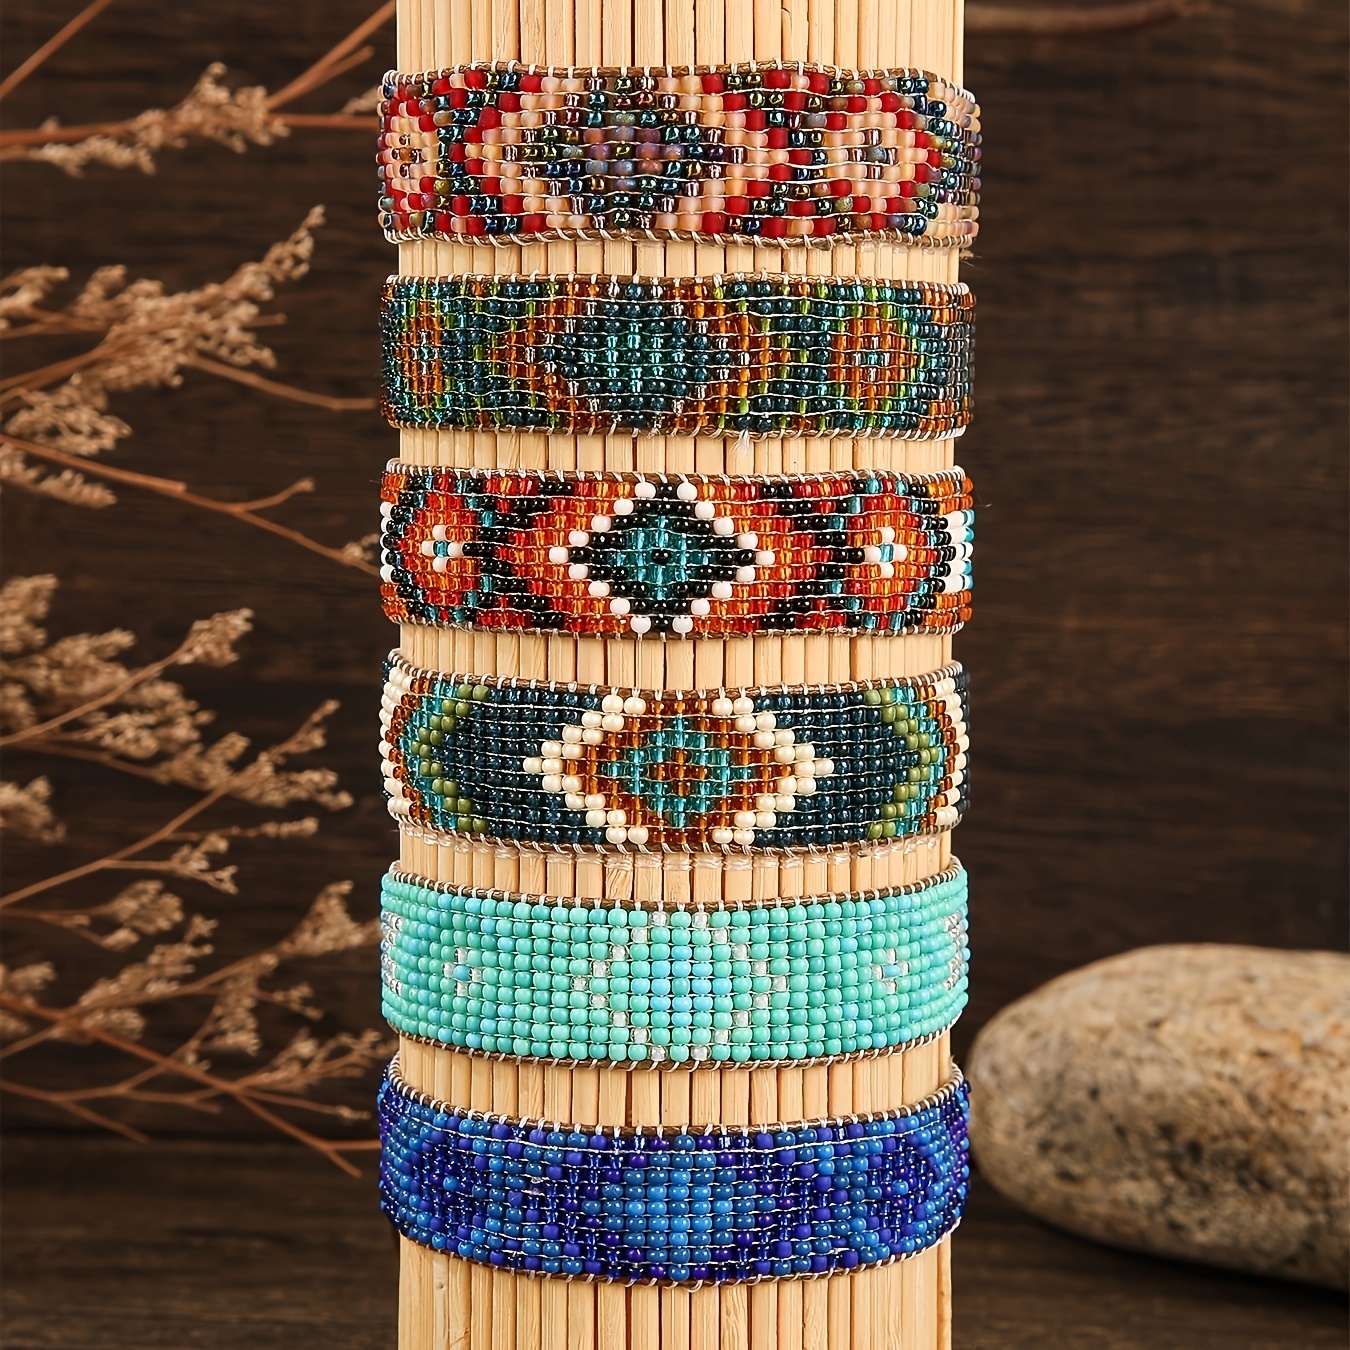 

1pc, Vintage Bohemian Style Geometric Pattern Glass Rice Bead Handmade Woven Beaded Women's Fashionable Beaded Bracelet Suitable For Daily Wear And Holiday Gifts